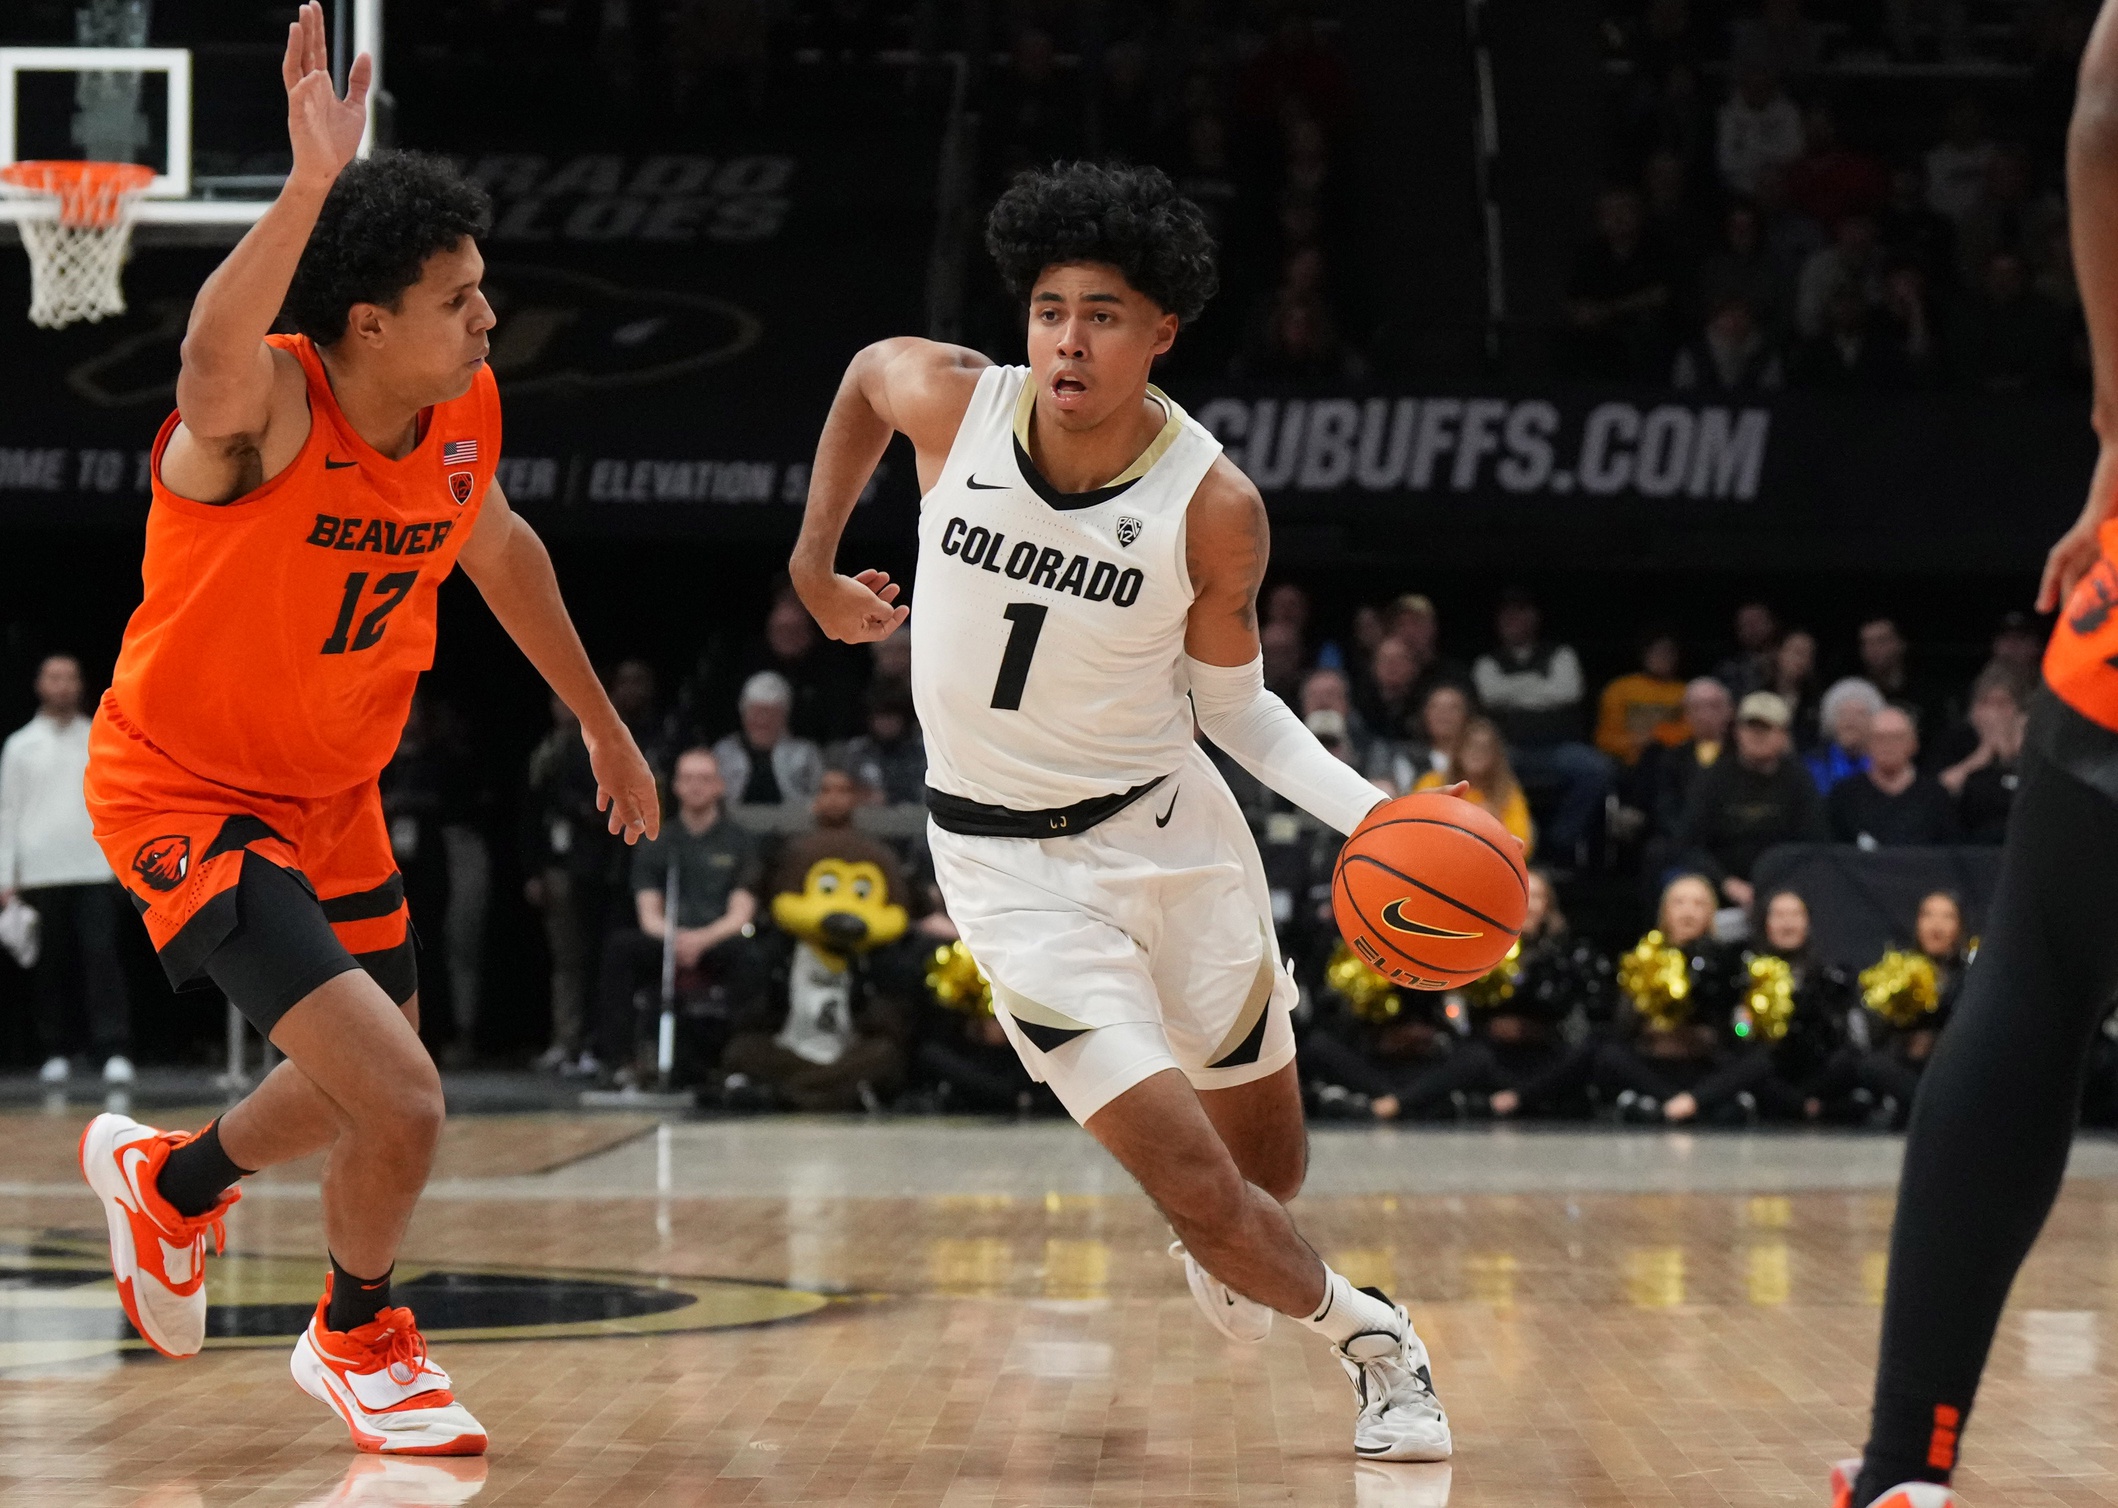 Utah Valley Wolverines vs Colorado Buffaloes Prediction, 3/19/2023 College Basketball Picks, Best Bets & Odds